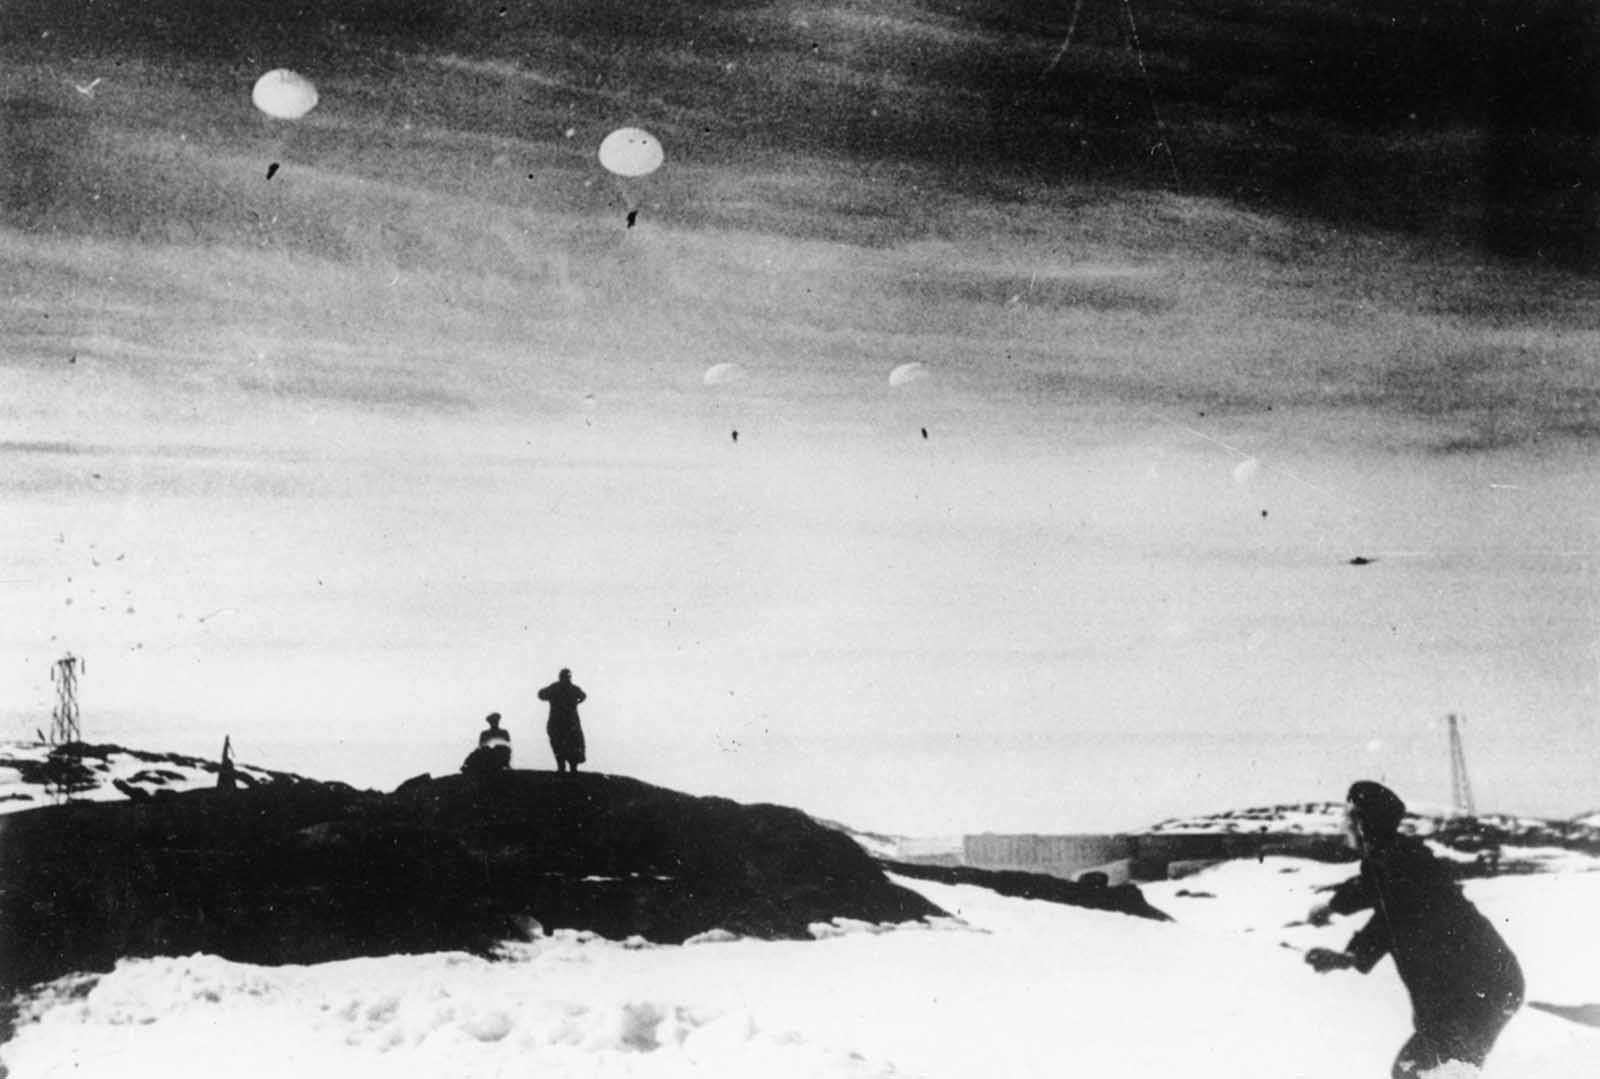 Waves of German paratroopers land on snow-covered rock ledges in the Norwegian port and city of Narvik, during the German invasion of the Scandinavian country.